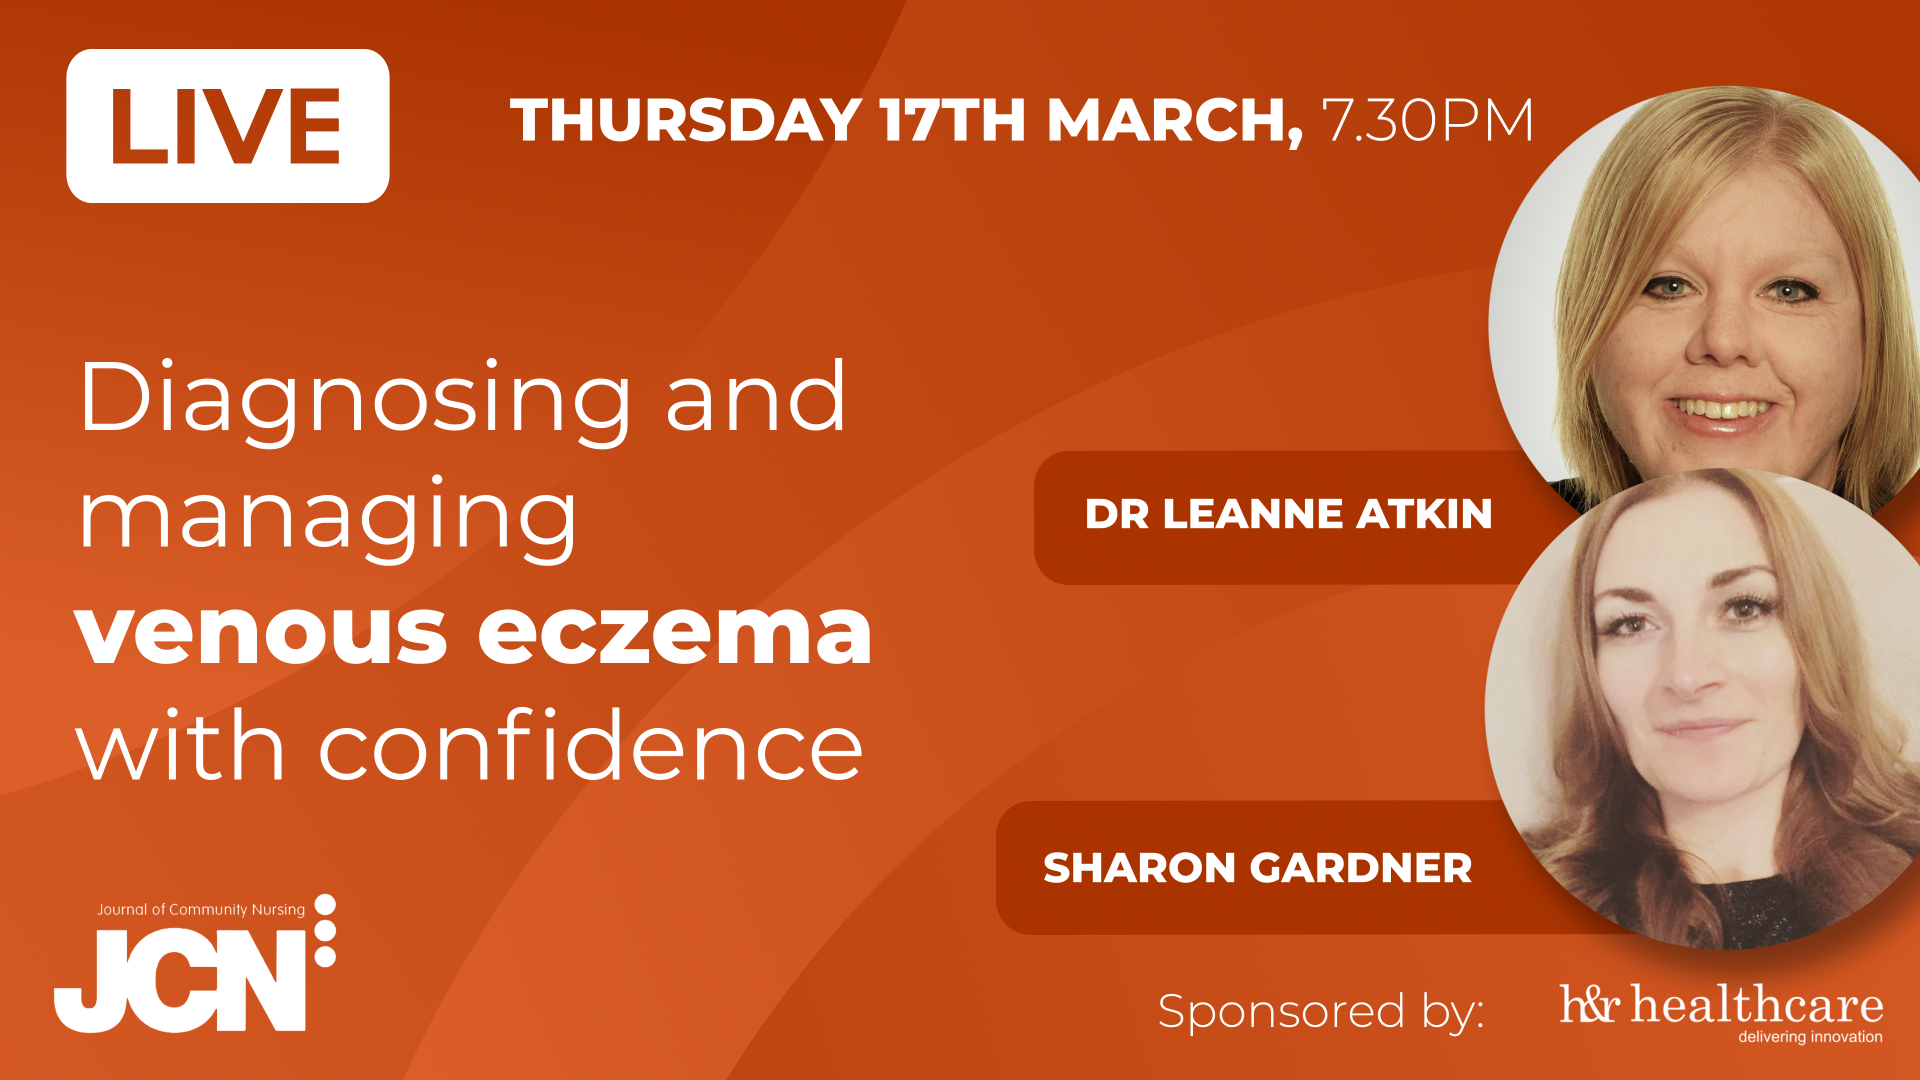 Facebook Live: Diagnosing and managing venous eczema with confidence